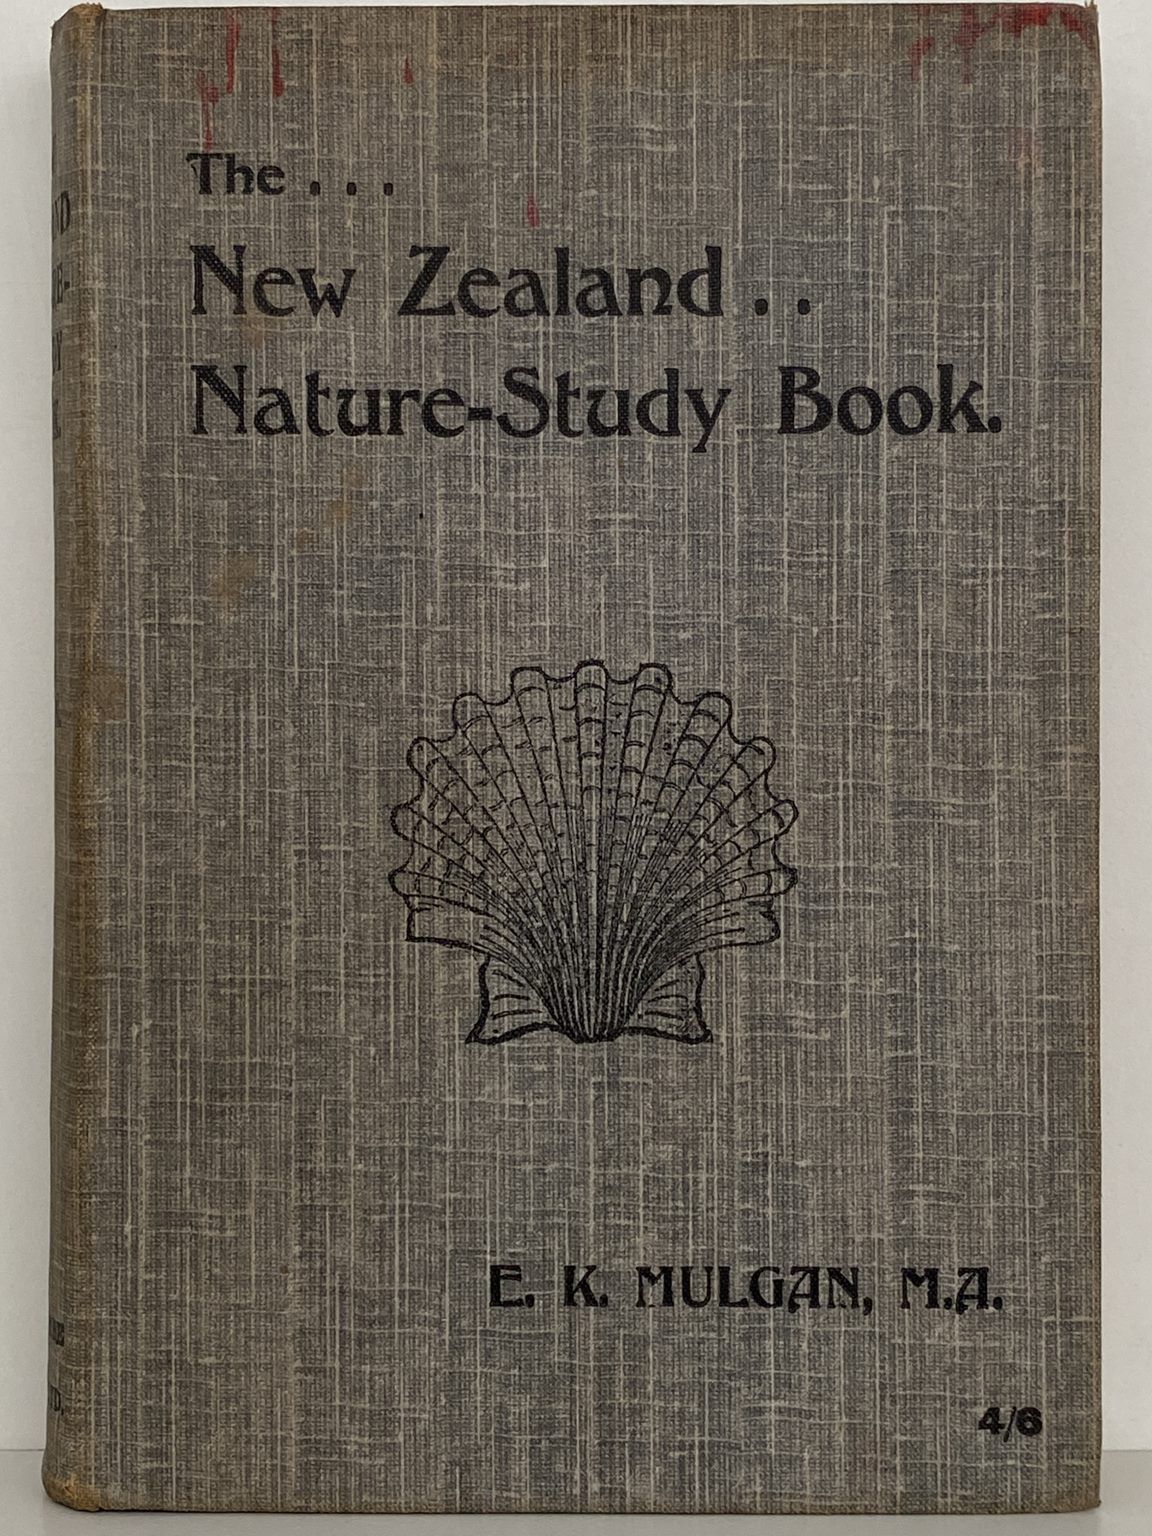 THE NEW ZEALAND NATURE STUDY BOOK